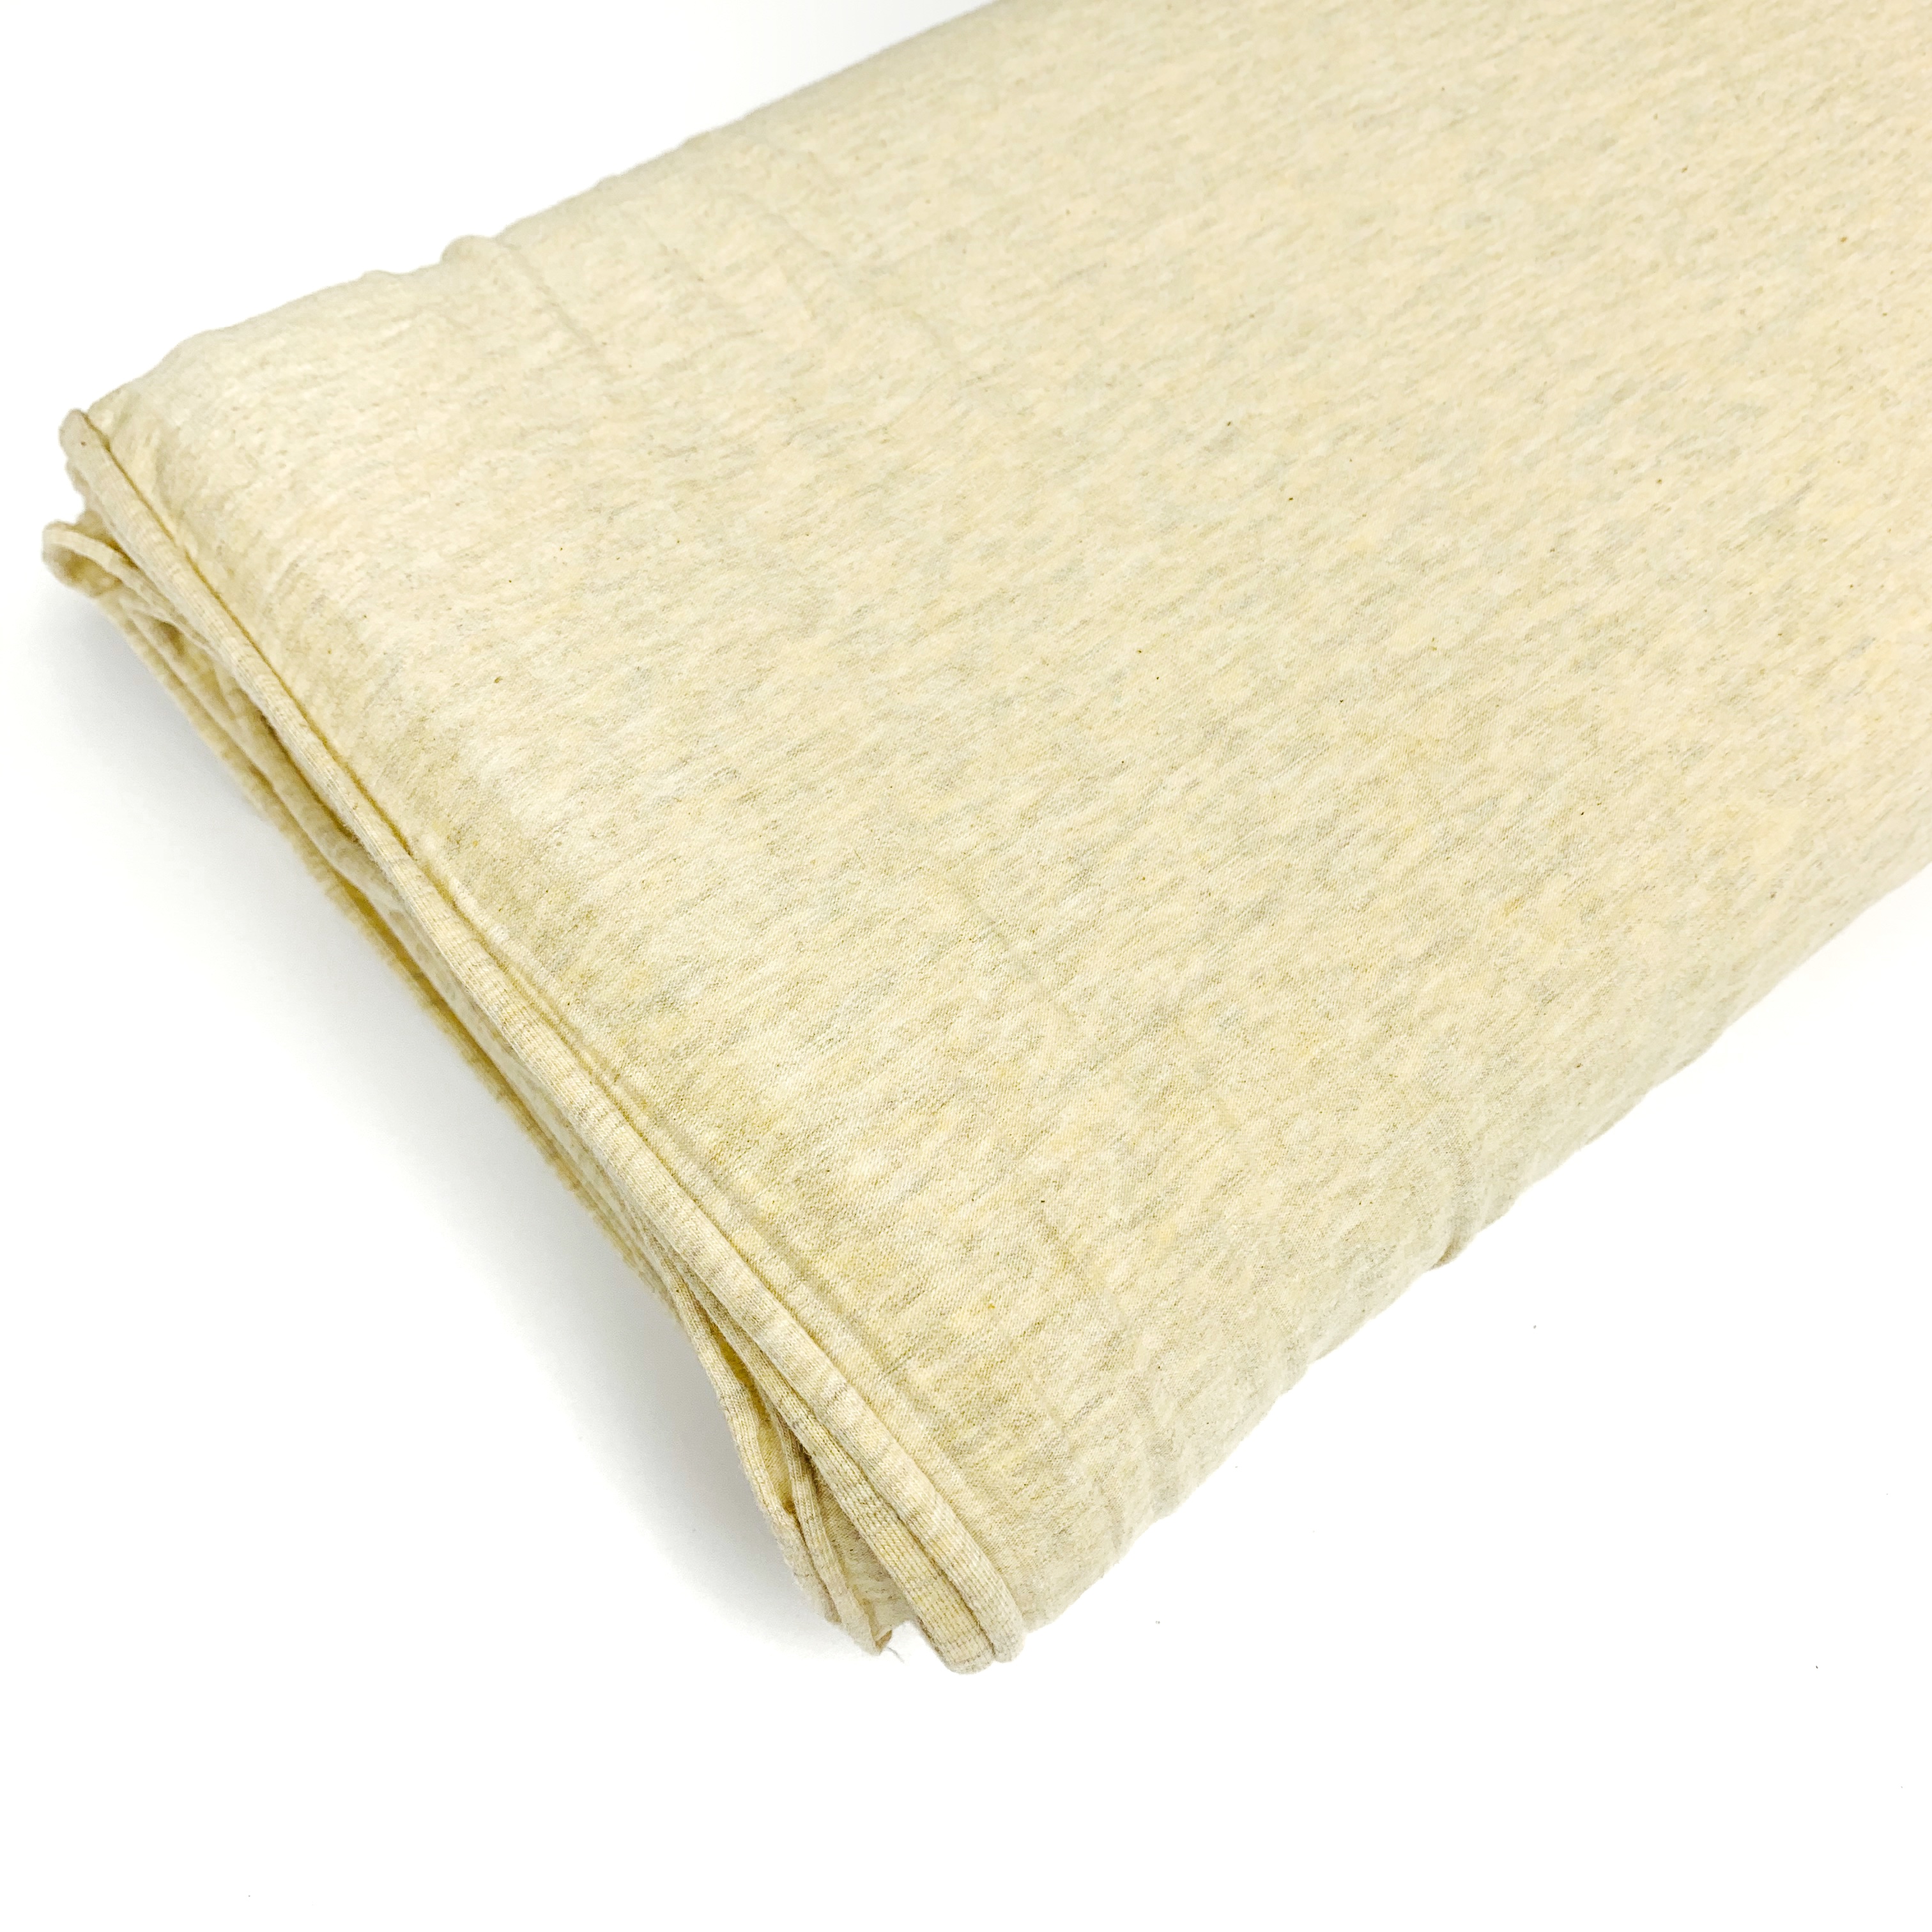 Oatmeal Cotton Jersey Knit Fabric by the Yard 200GSM -  Finland